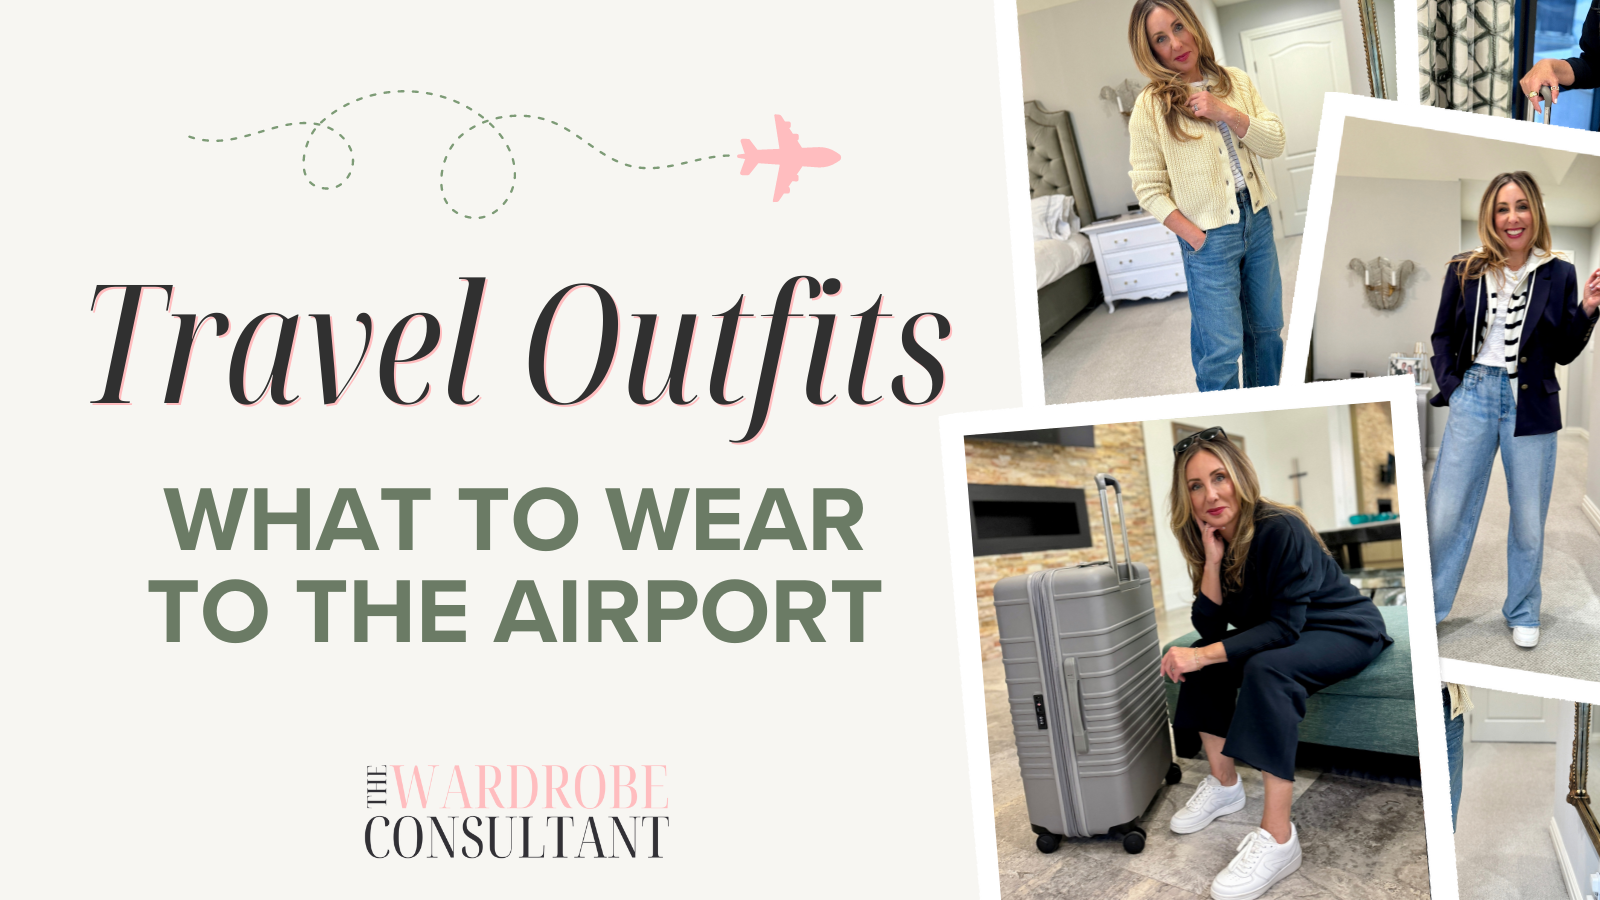 Travel Outfits: What to Wear to the Airport — The Wardrobe Consultant